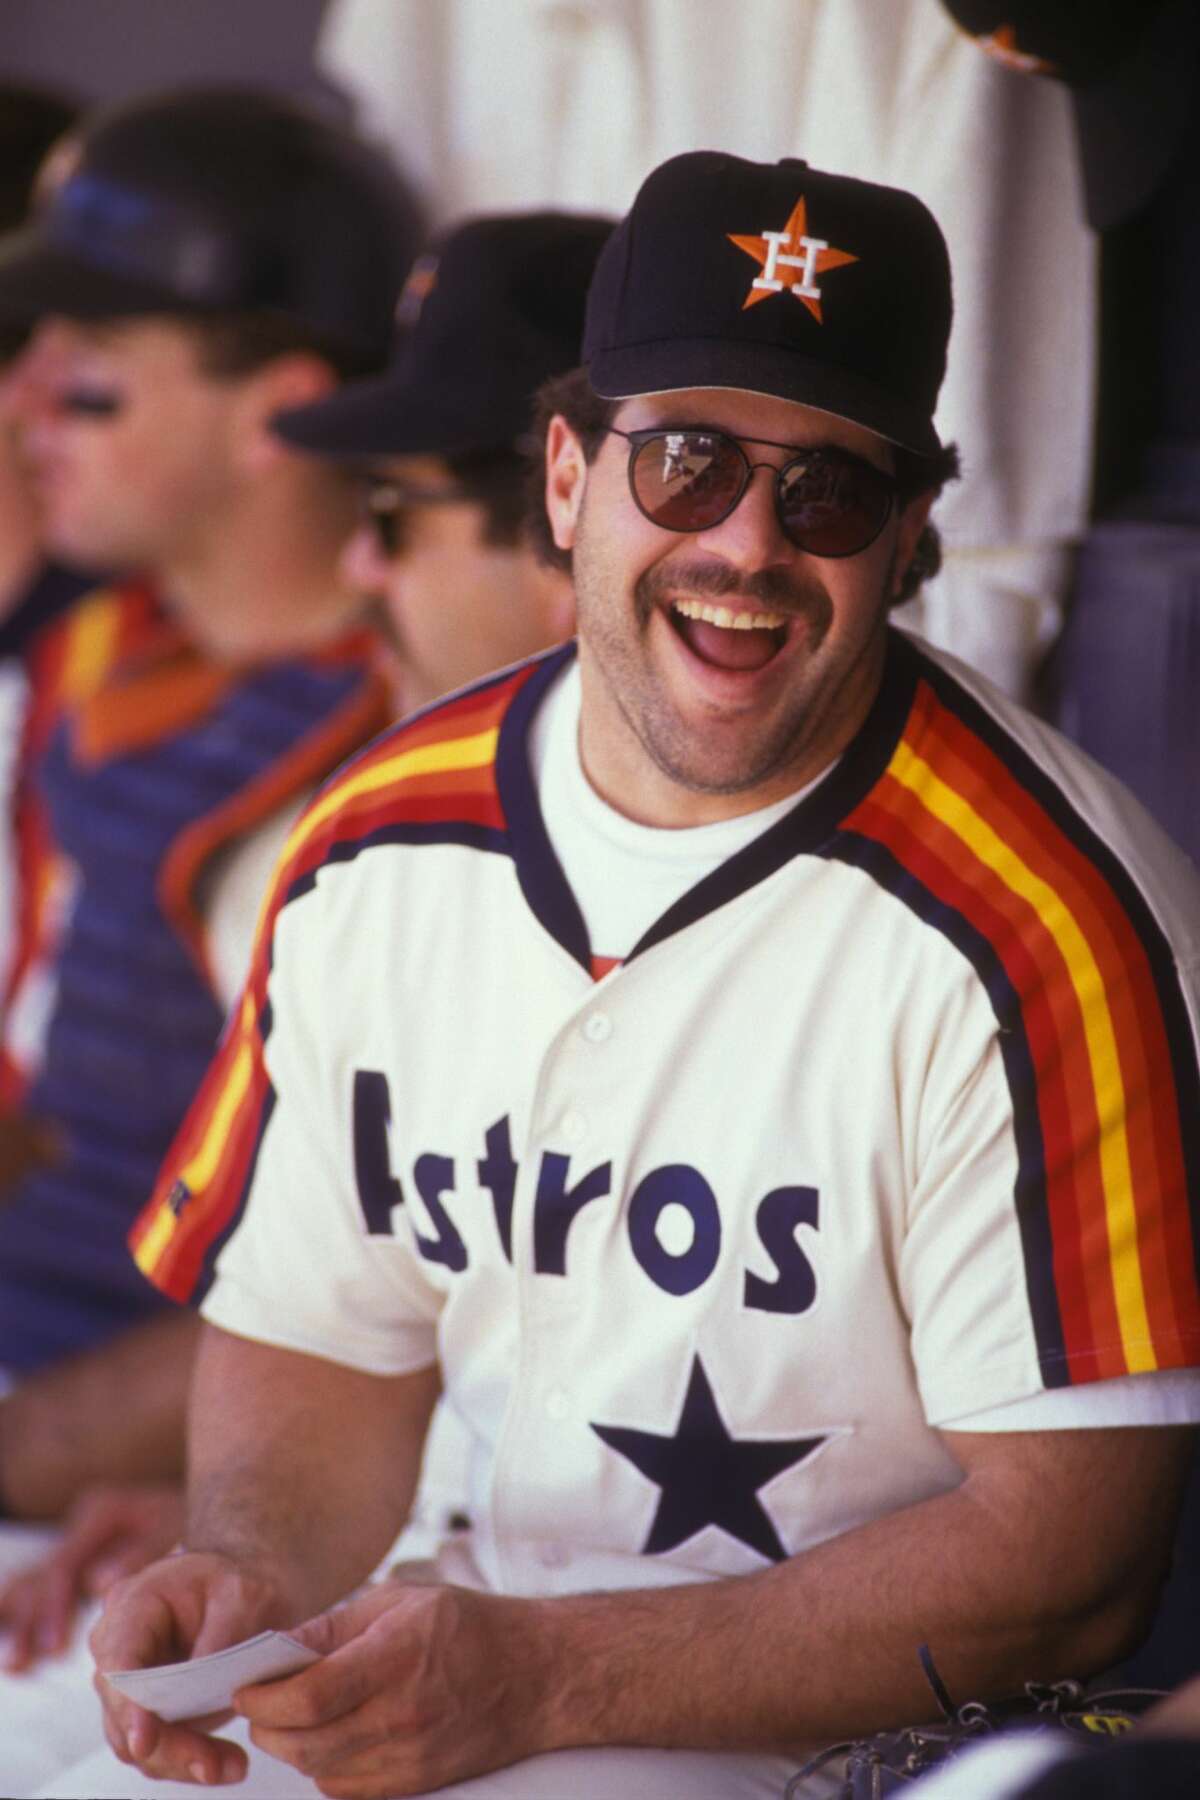 28 days later: Astros' 1992 odyssey quite memorable in many ways